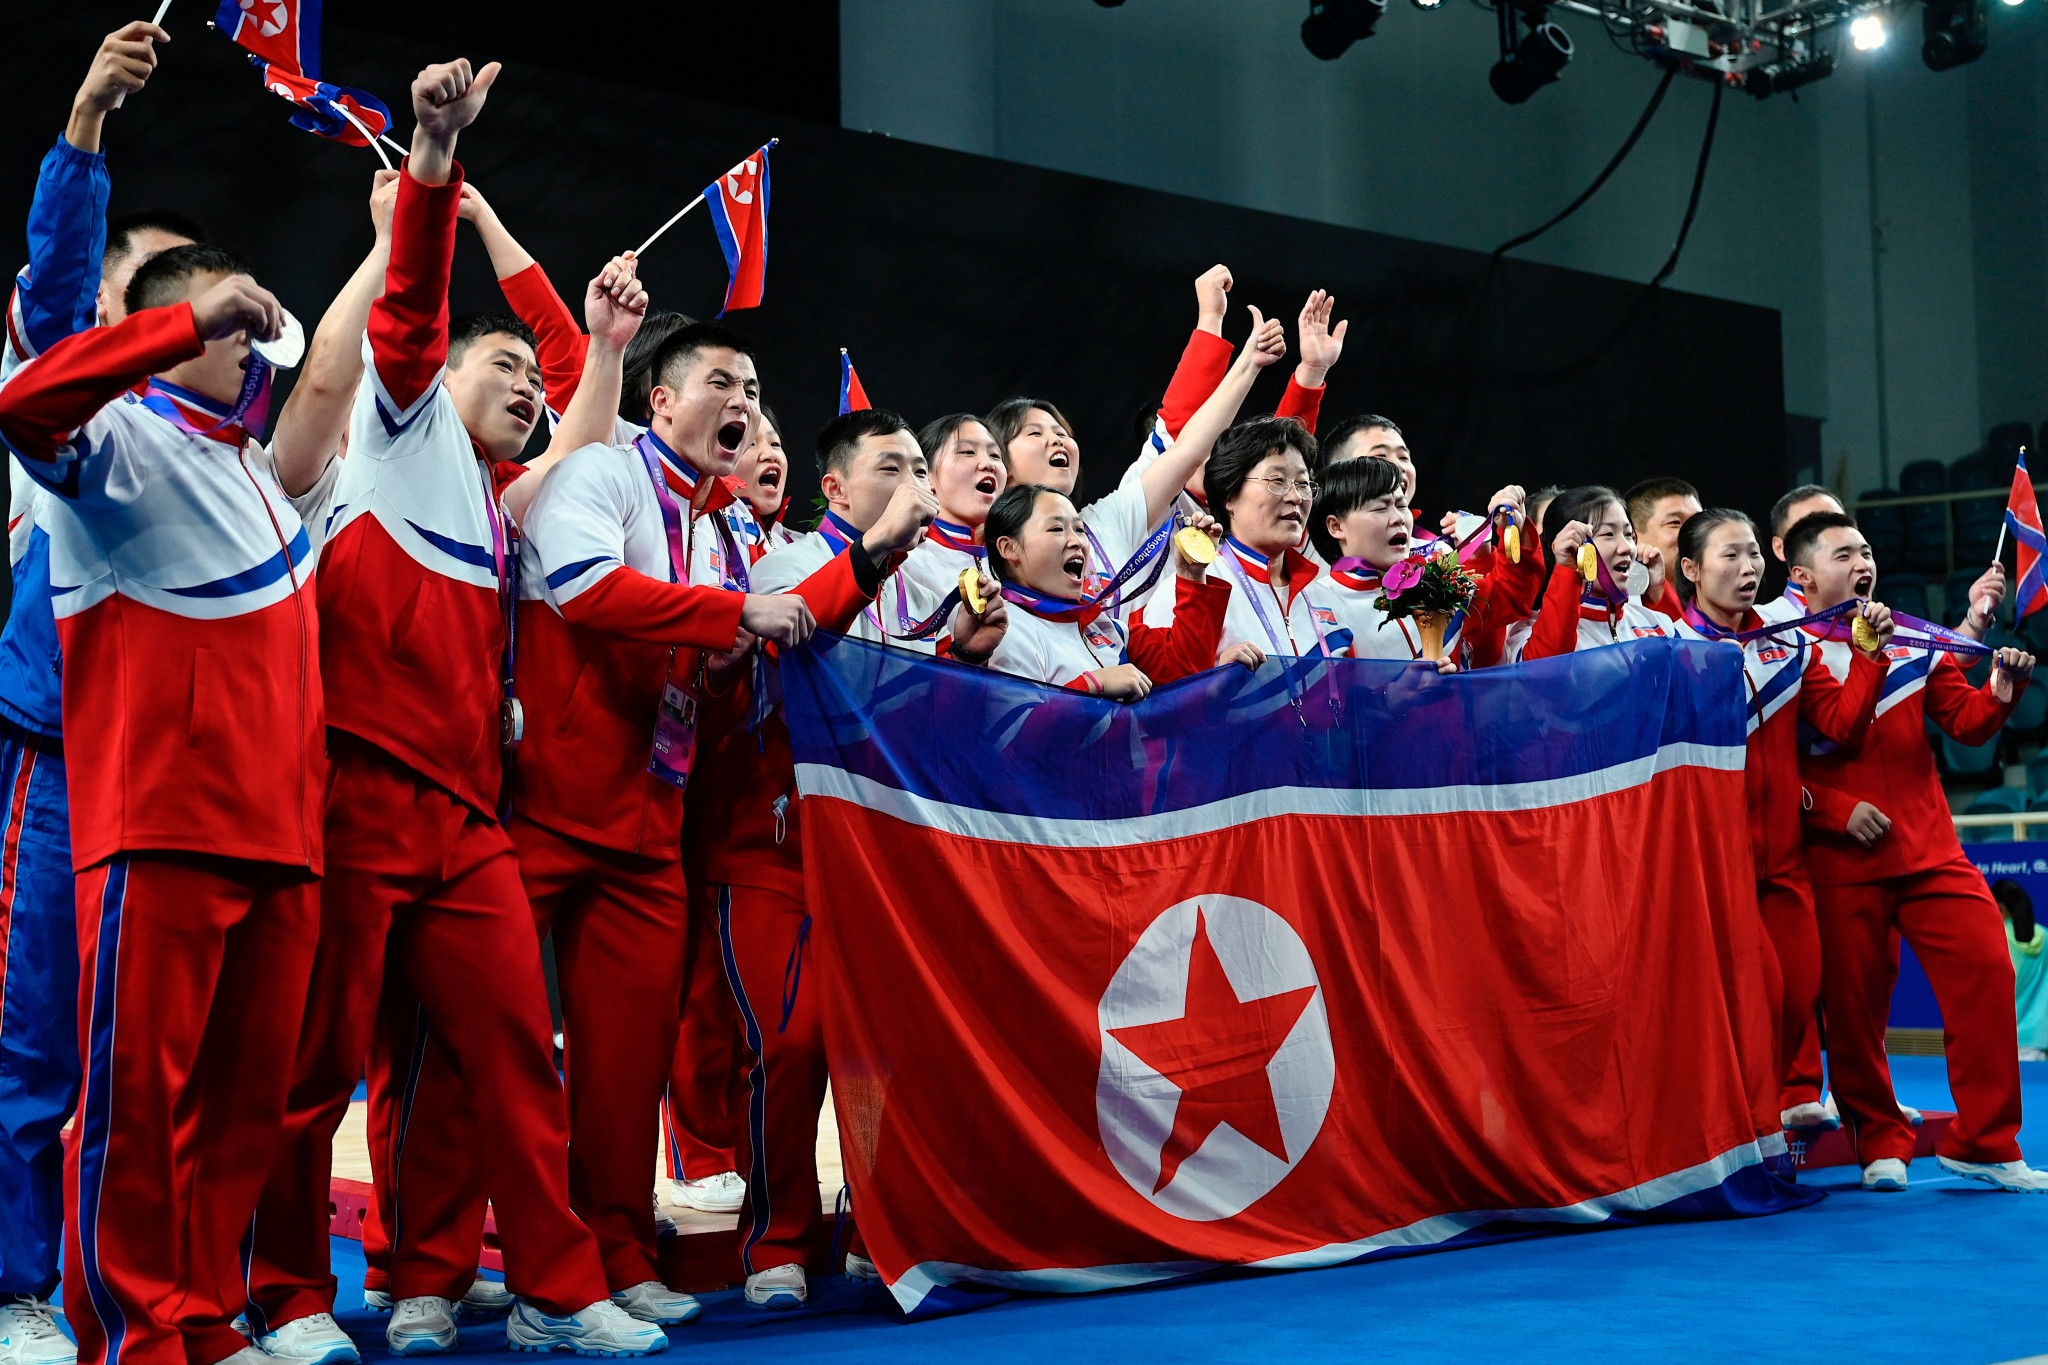 North Korea "opens up" to foreigners following stunning Asian Games return after threat of exclusion from weightlifting